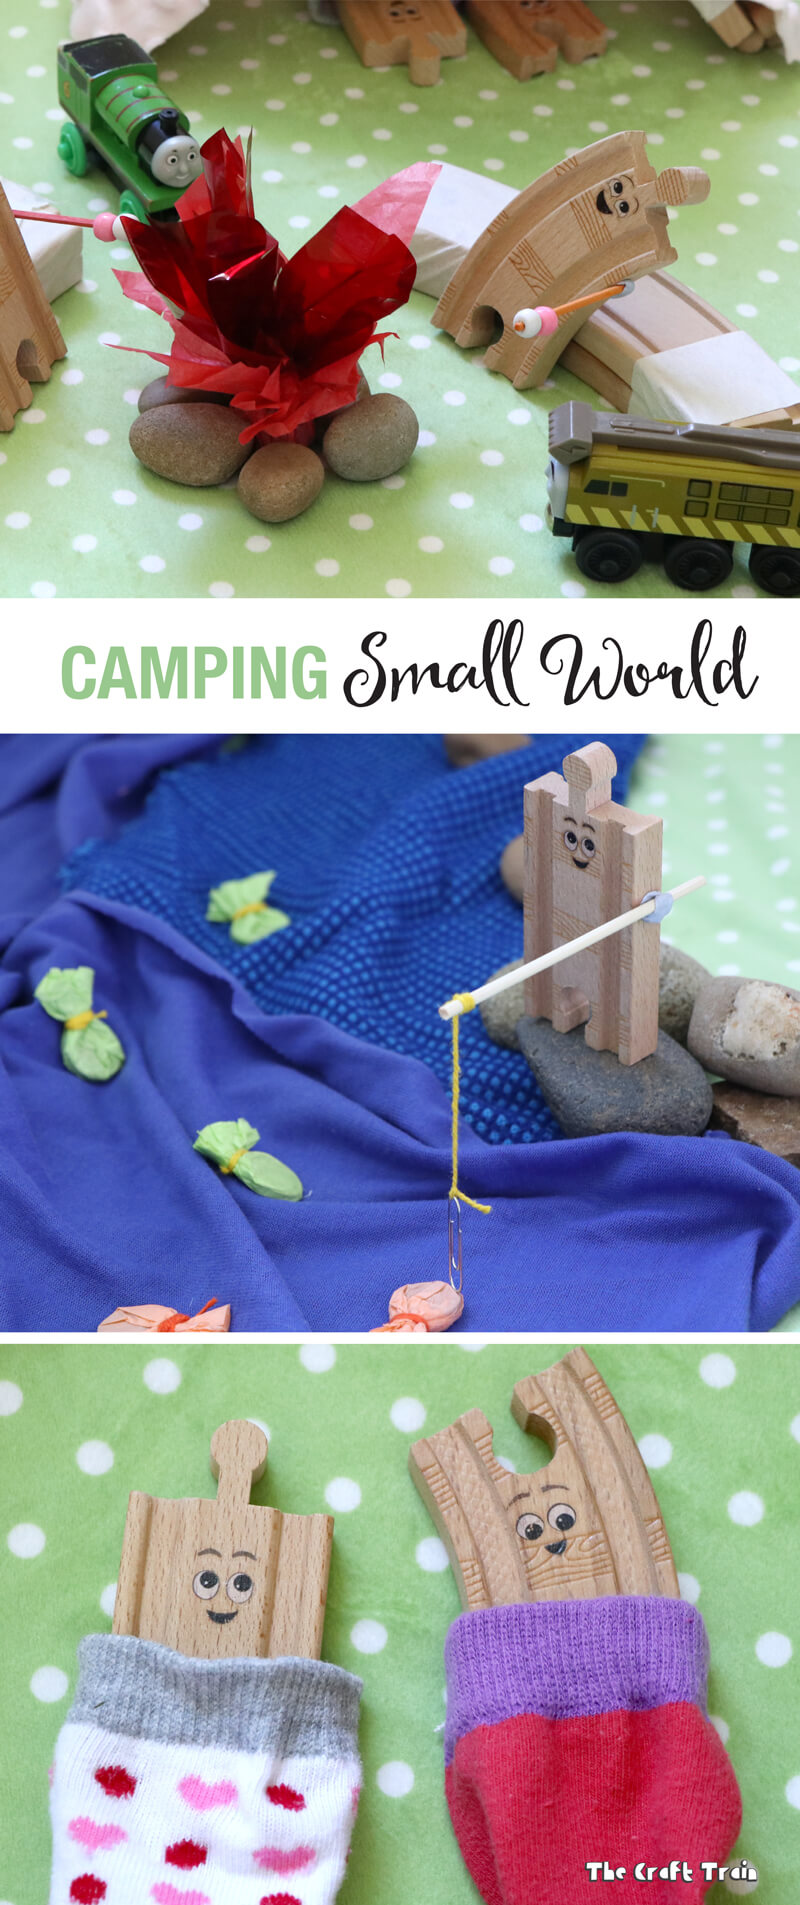 DIY camping small world for creative play. Includes magnet fish, a train-track frame tent and a crackling campfire complete with marshmallows on sticks. This has been inspired by the book 'Old Tracks New Tricks' by Jessica Peterson. 